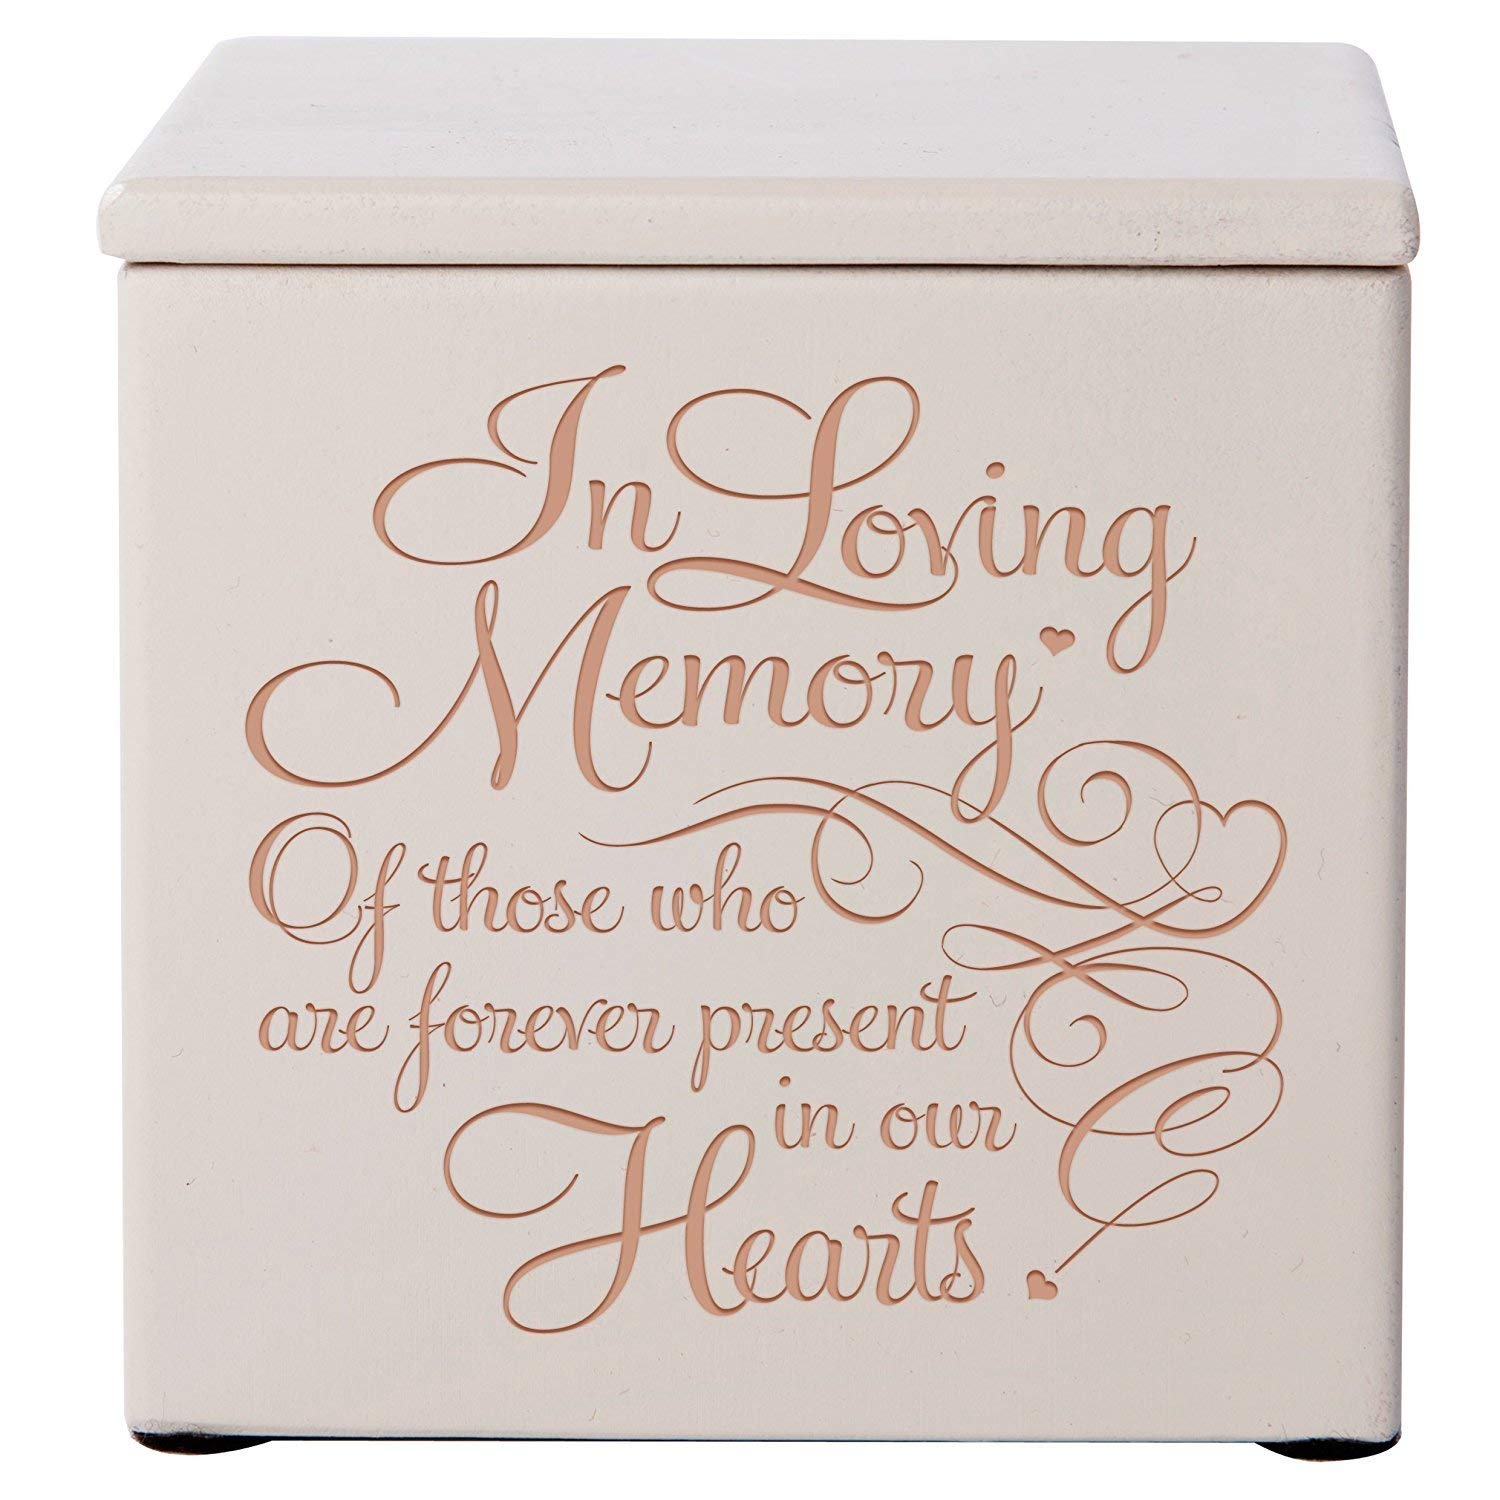 human urn ashes memorial funeral adult child ivory